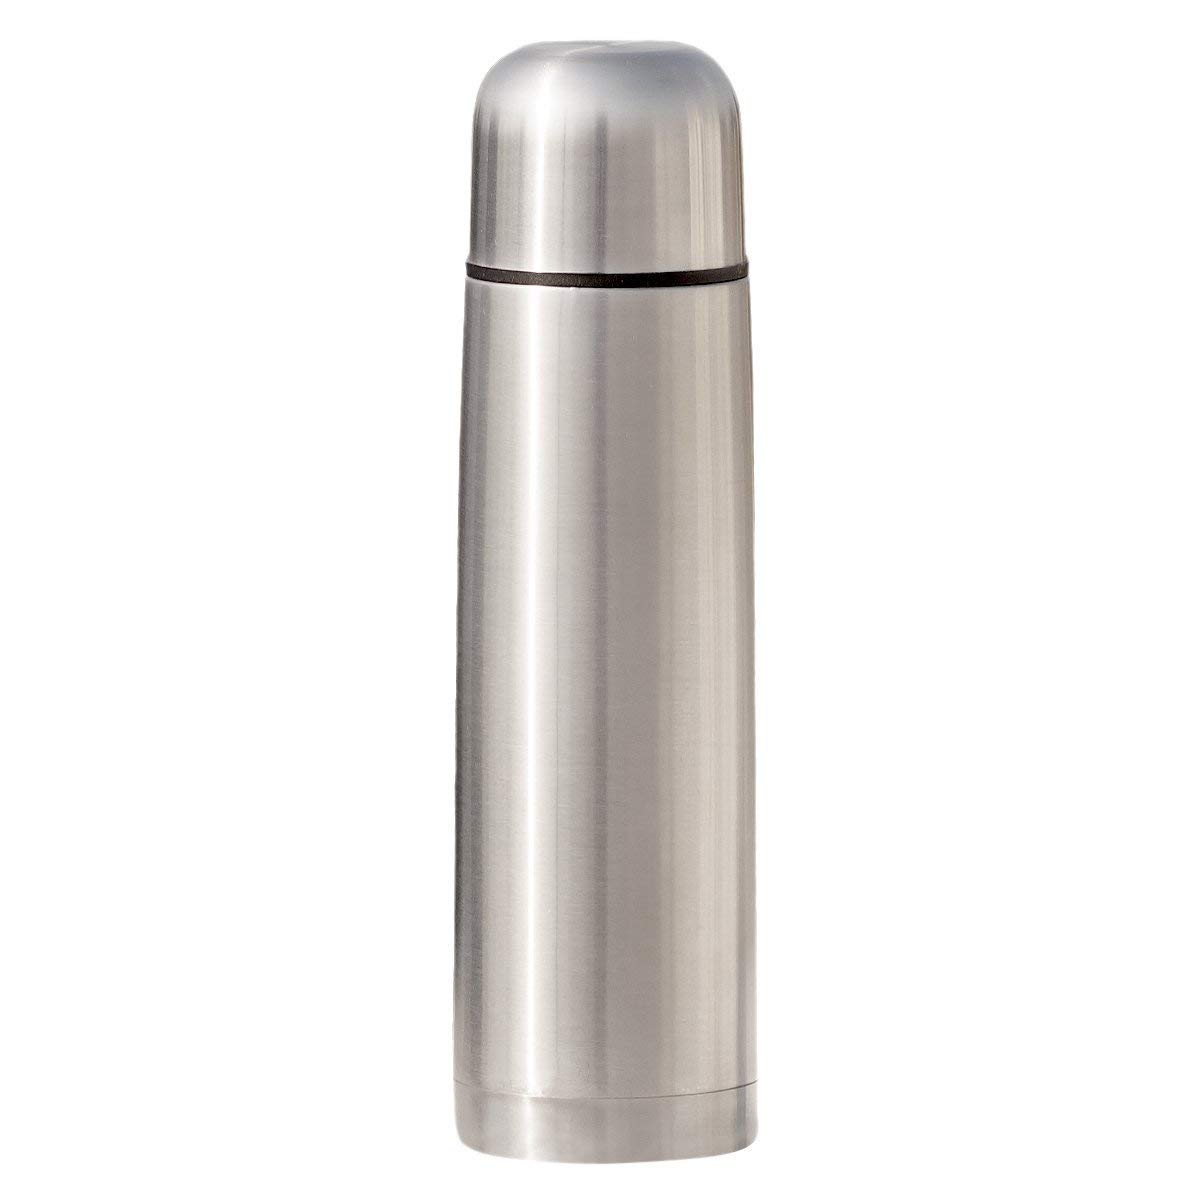 Best Stainless Steel Coffee Thermos - BPA Free - Triple Wall